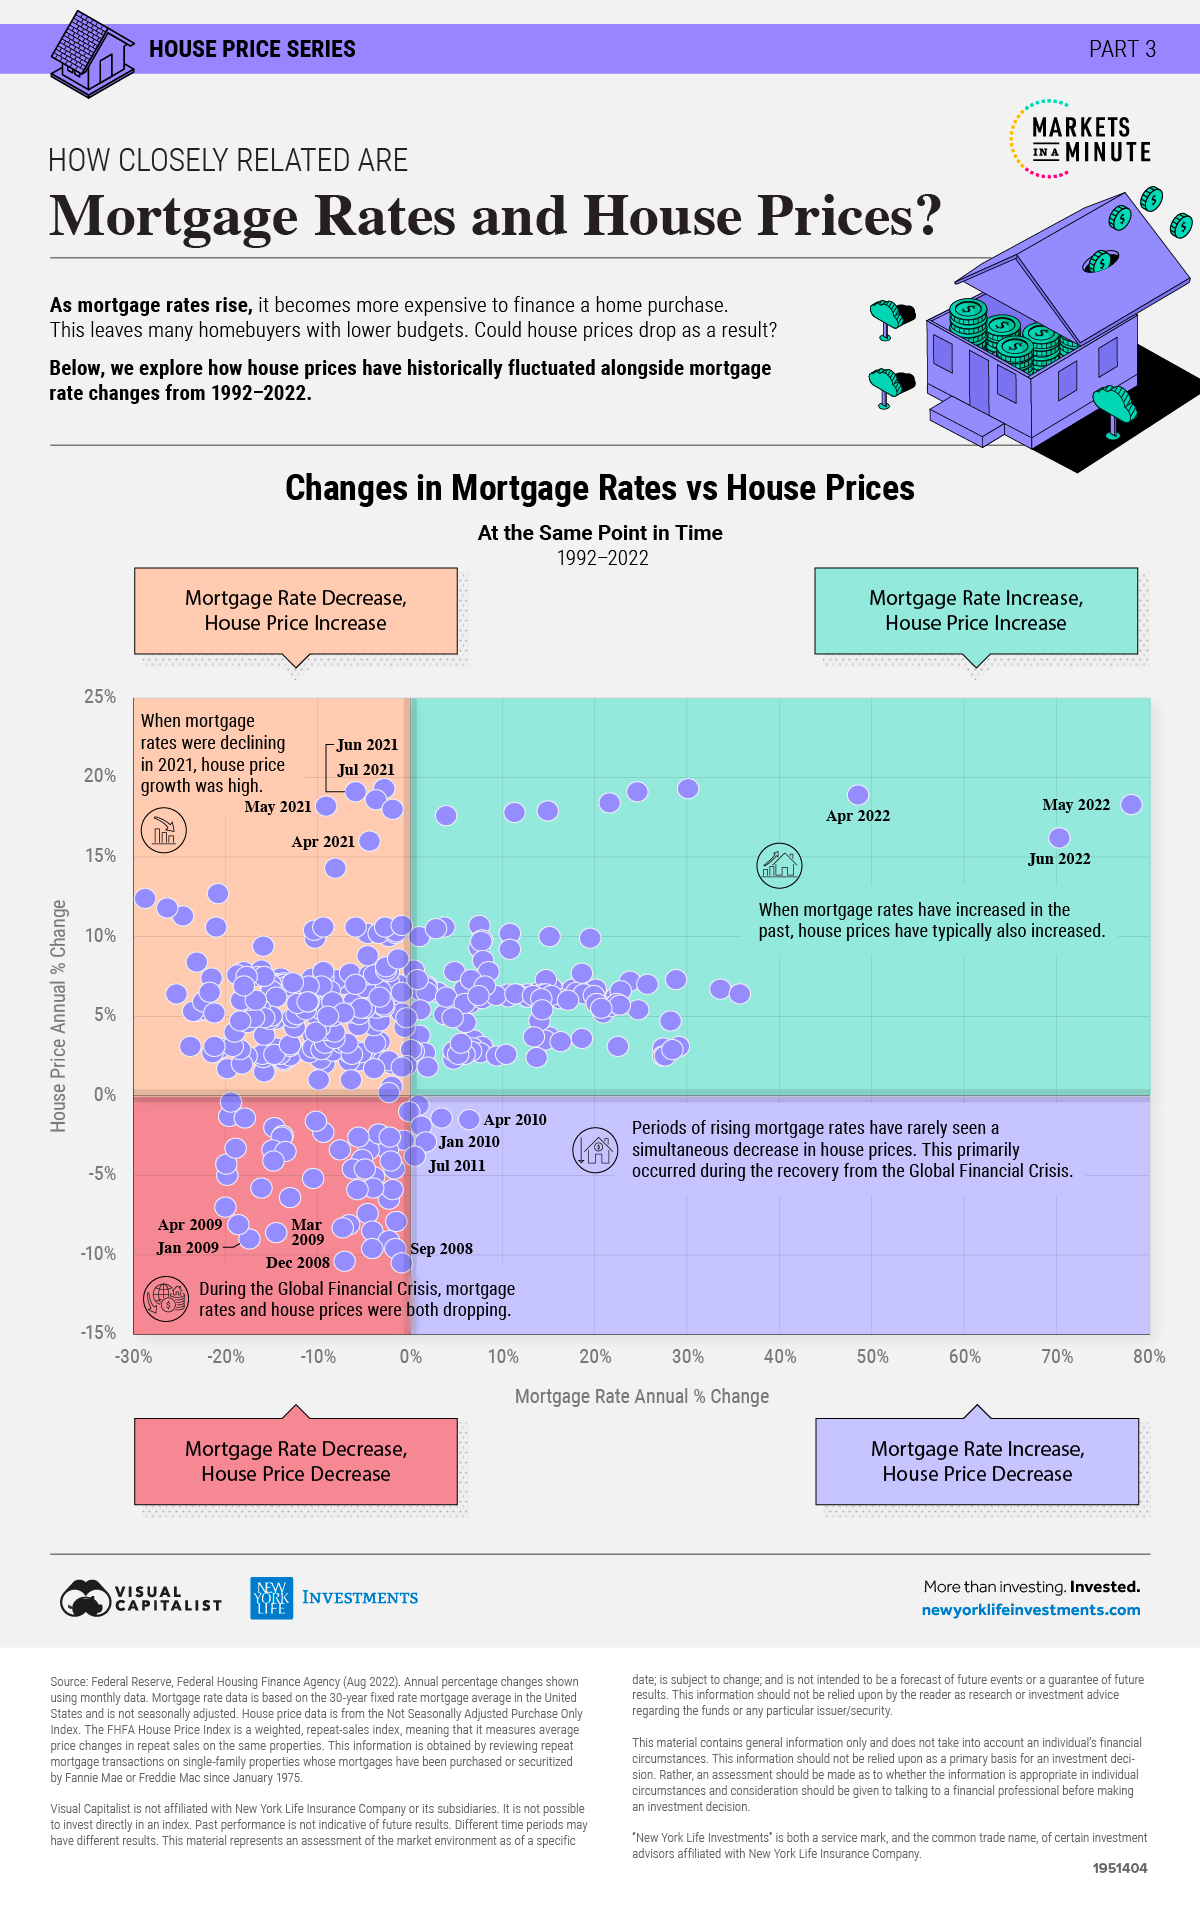 Scatterplot showing the relationship between historical mortgage rates and house prices at the same point in time.